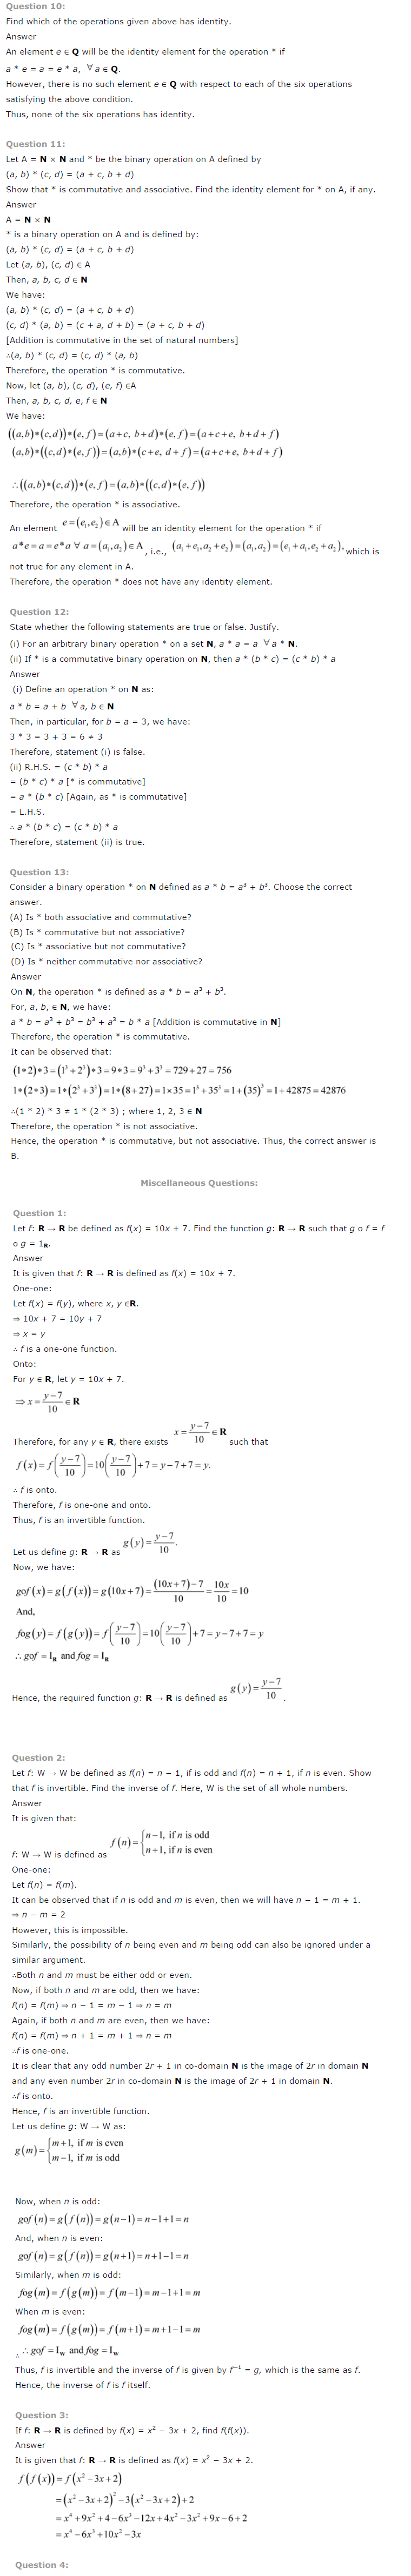 NCERT Solutions For Class 12 Maths Chapter 1 Relations and Functions-10